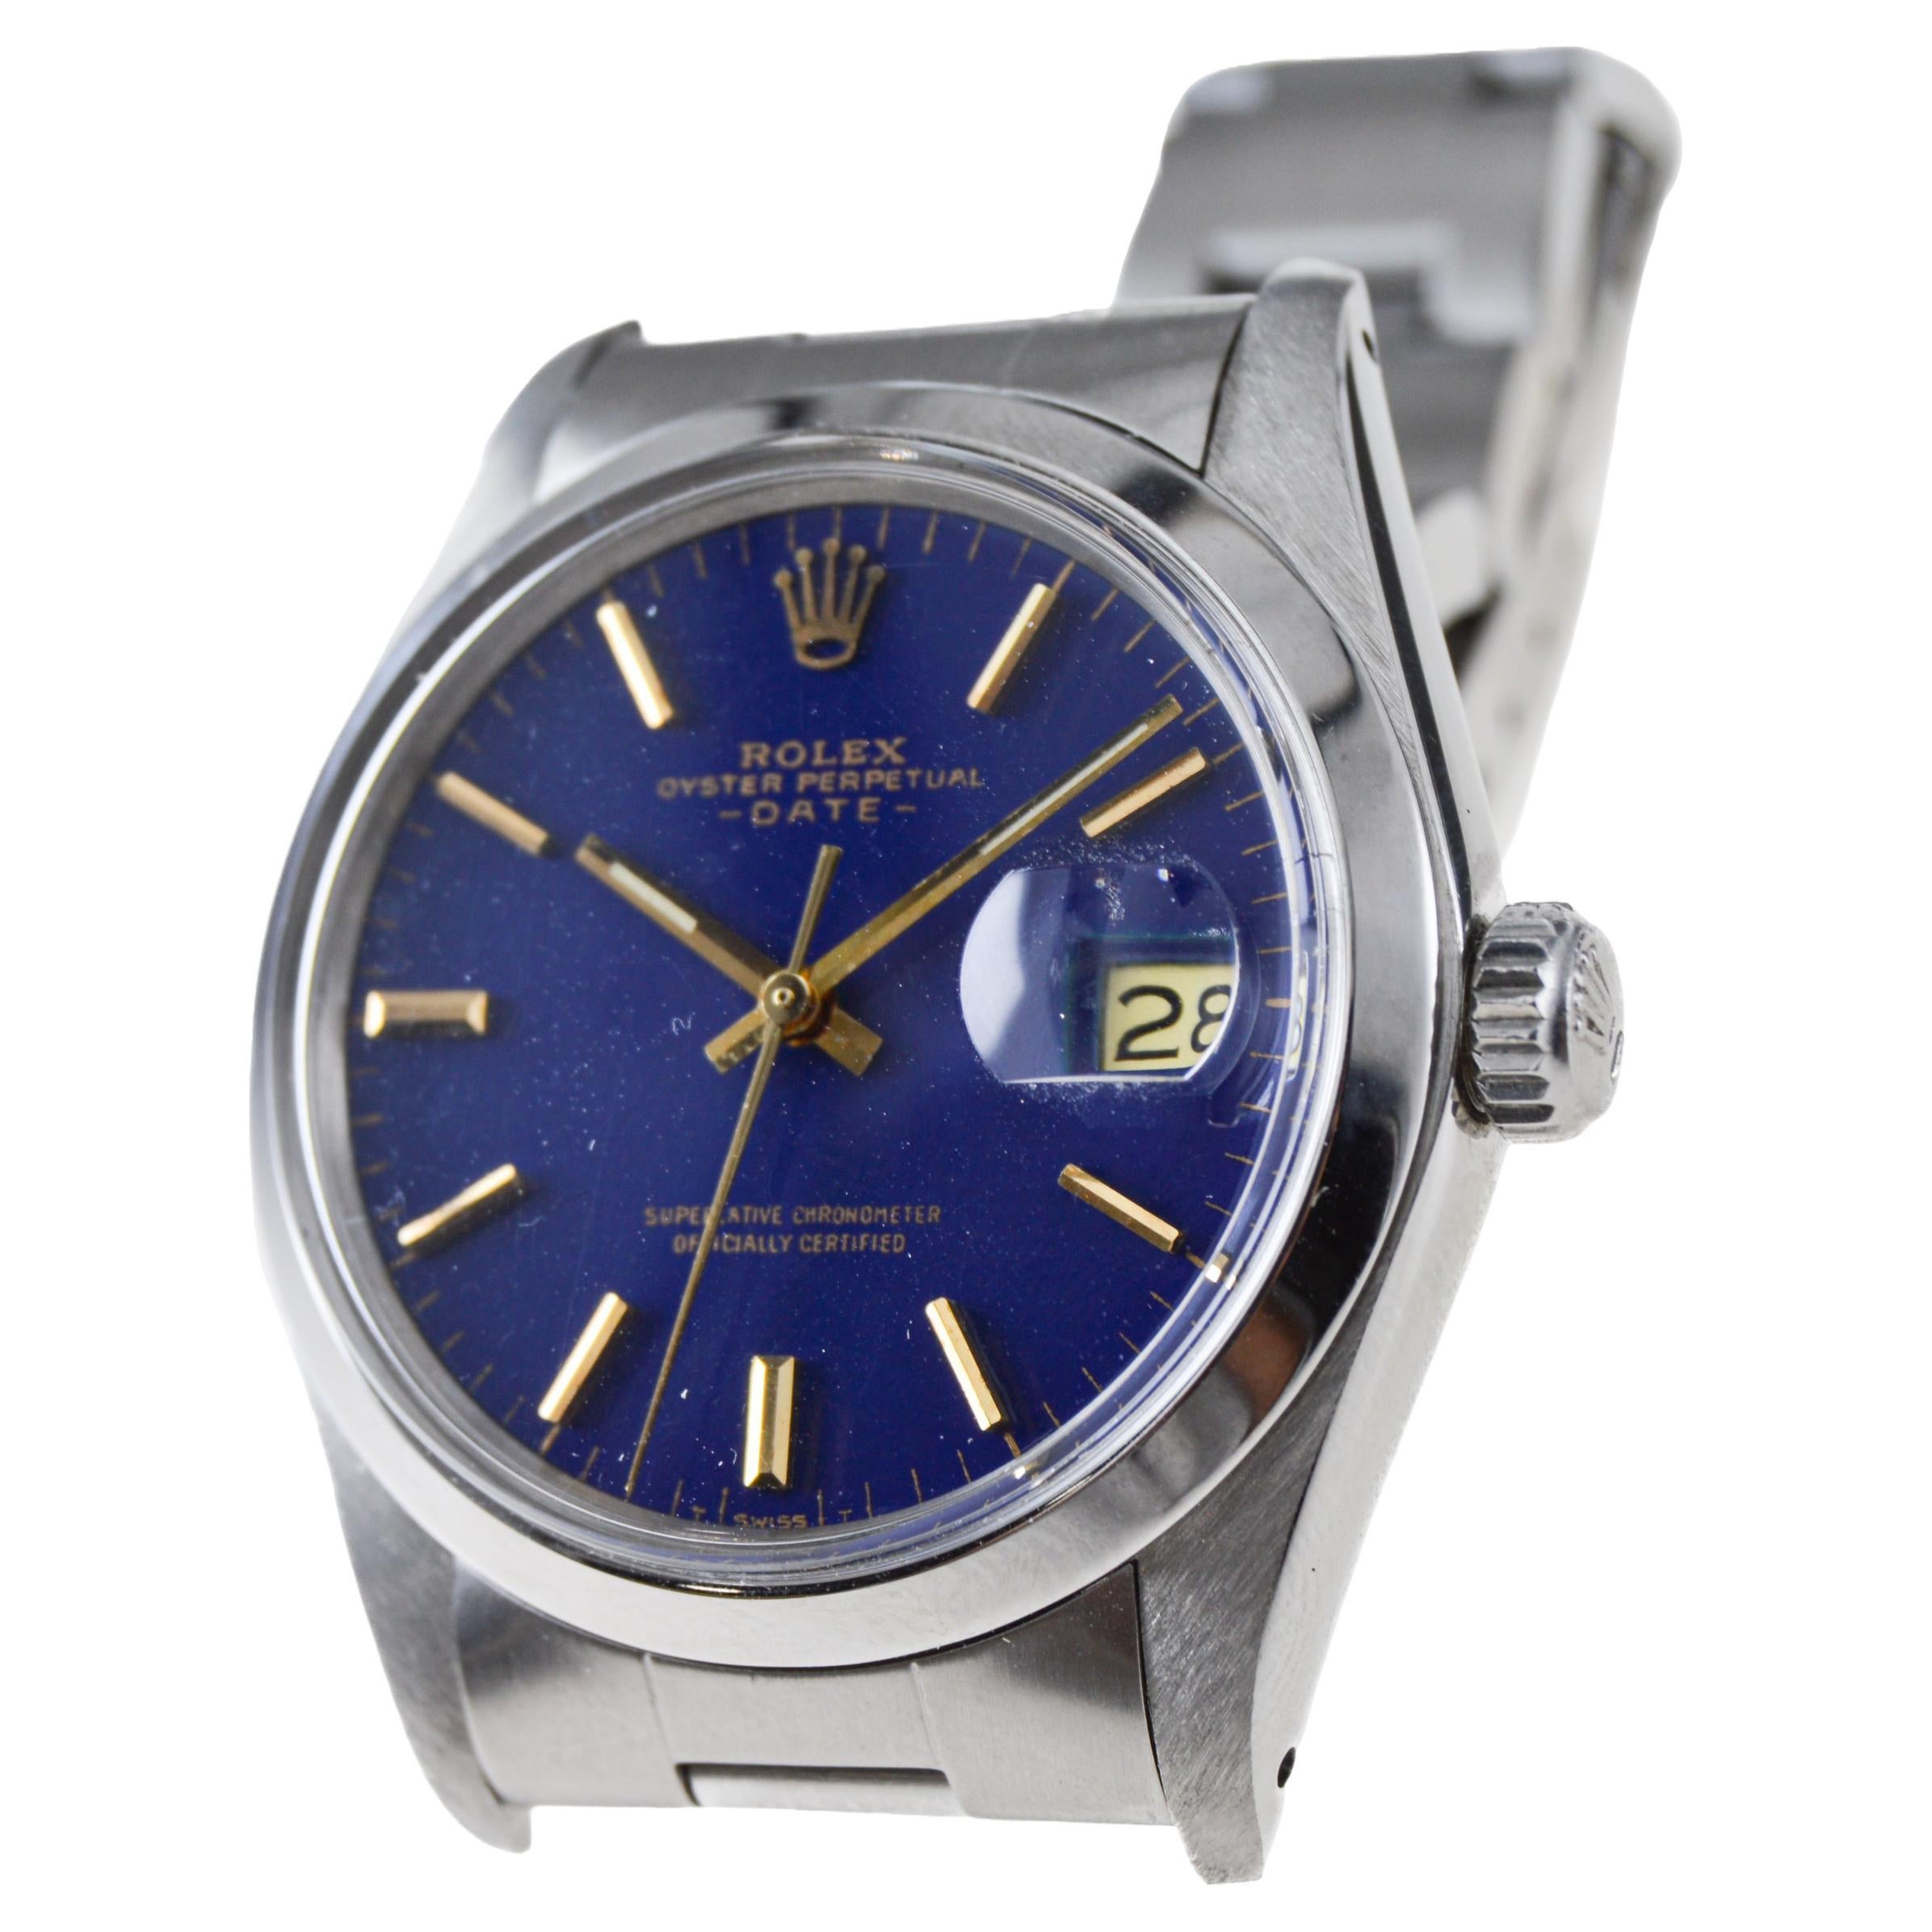 Rolex Oyster Perpetual Date With Custom Blue Dial 1970's In Excellent Condition For Sale In Long Beach, CA